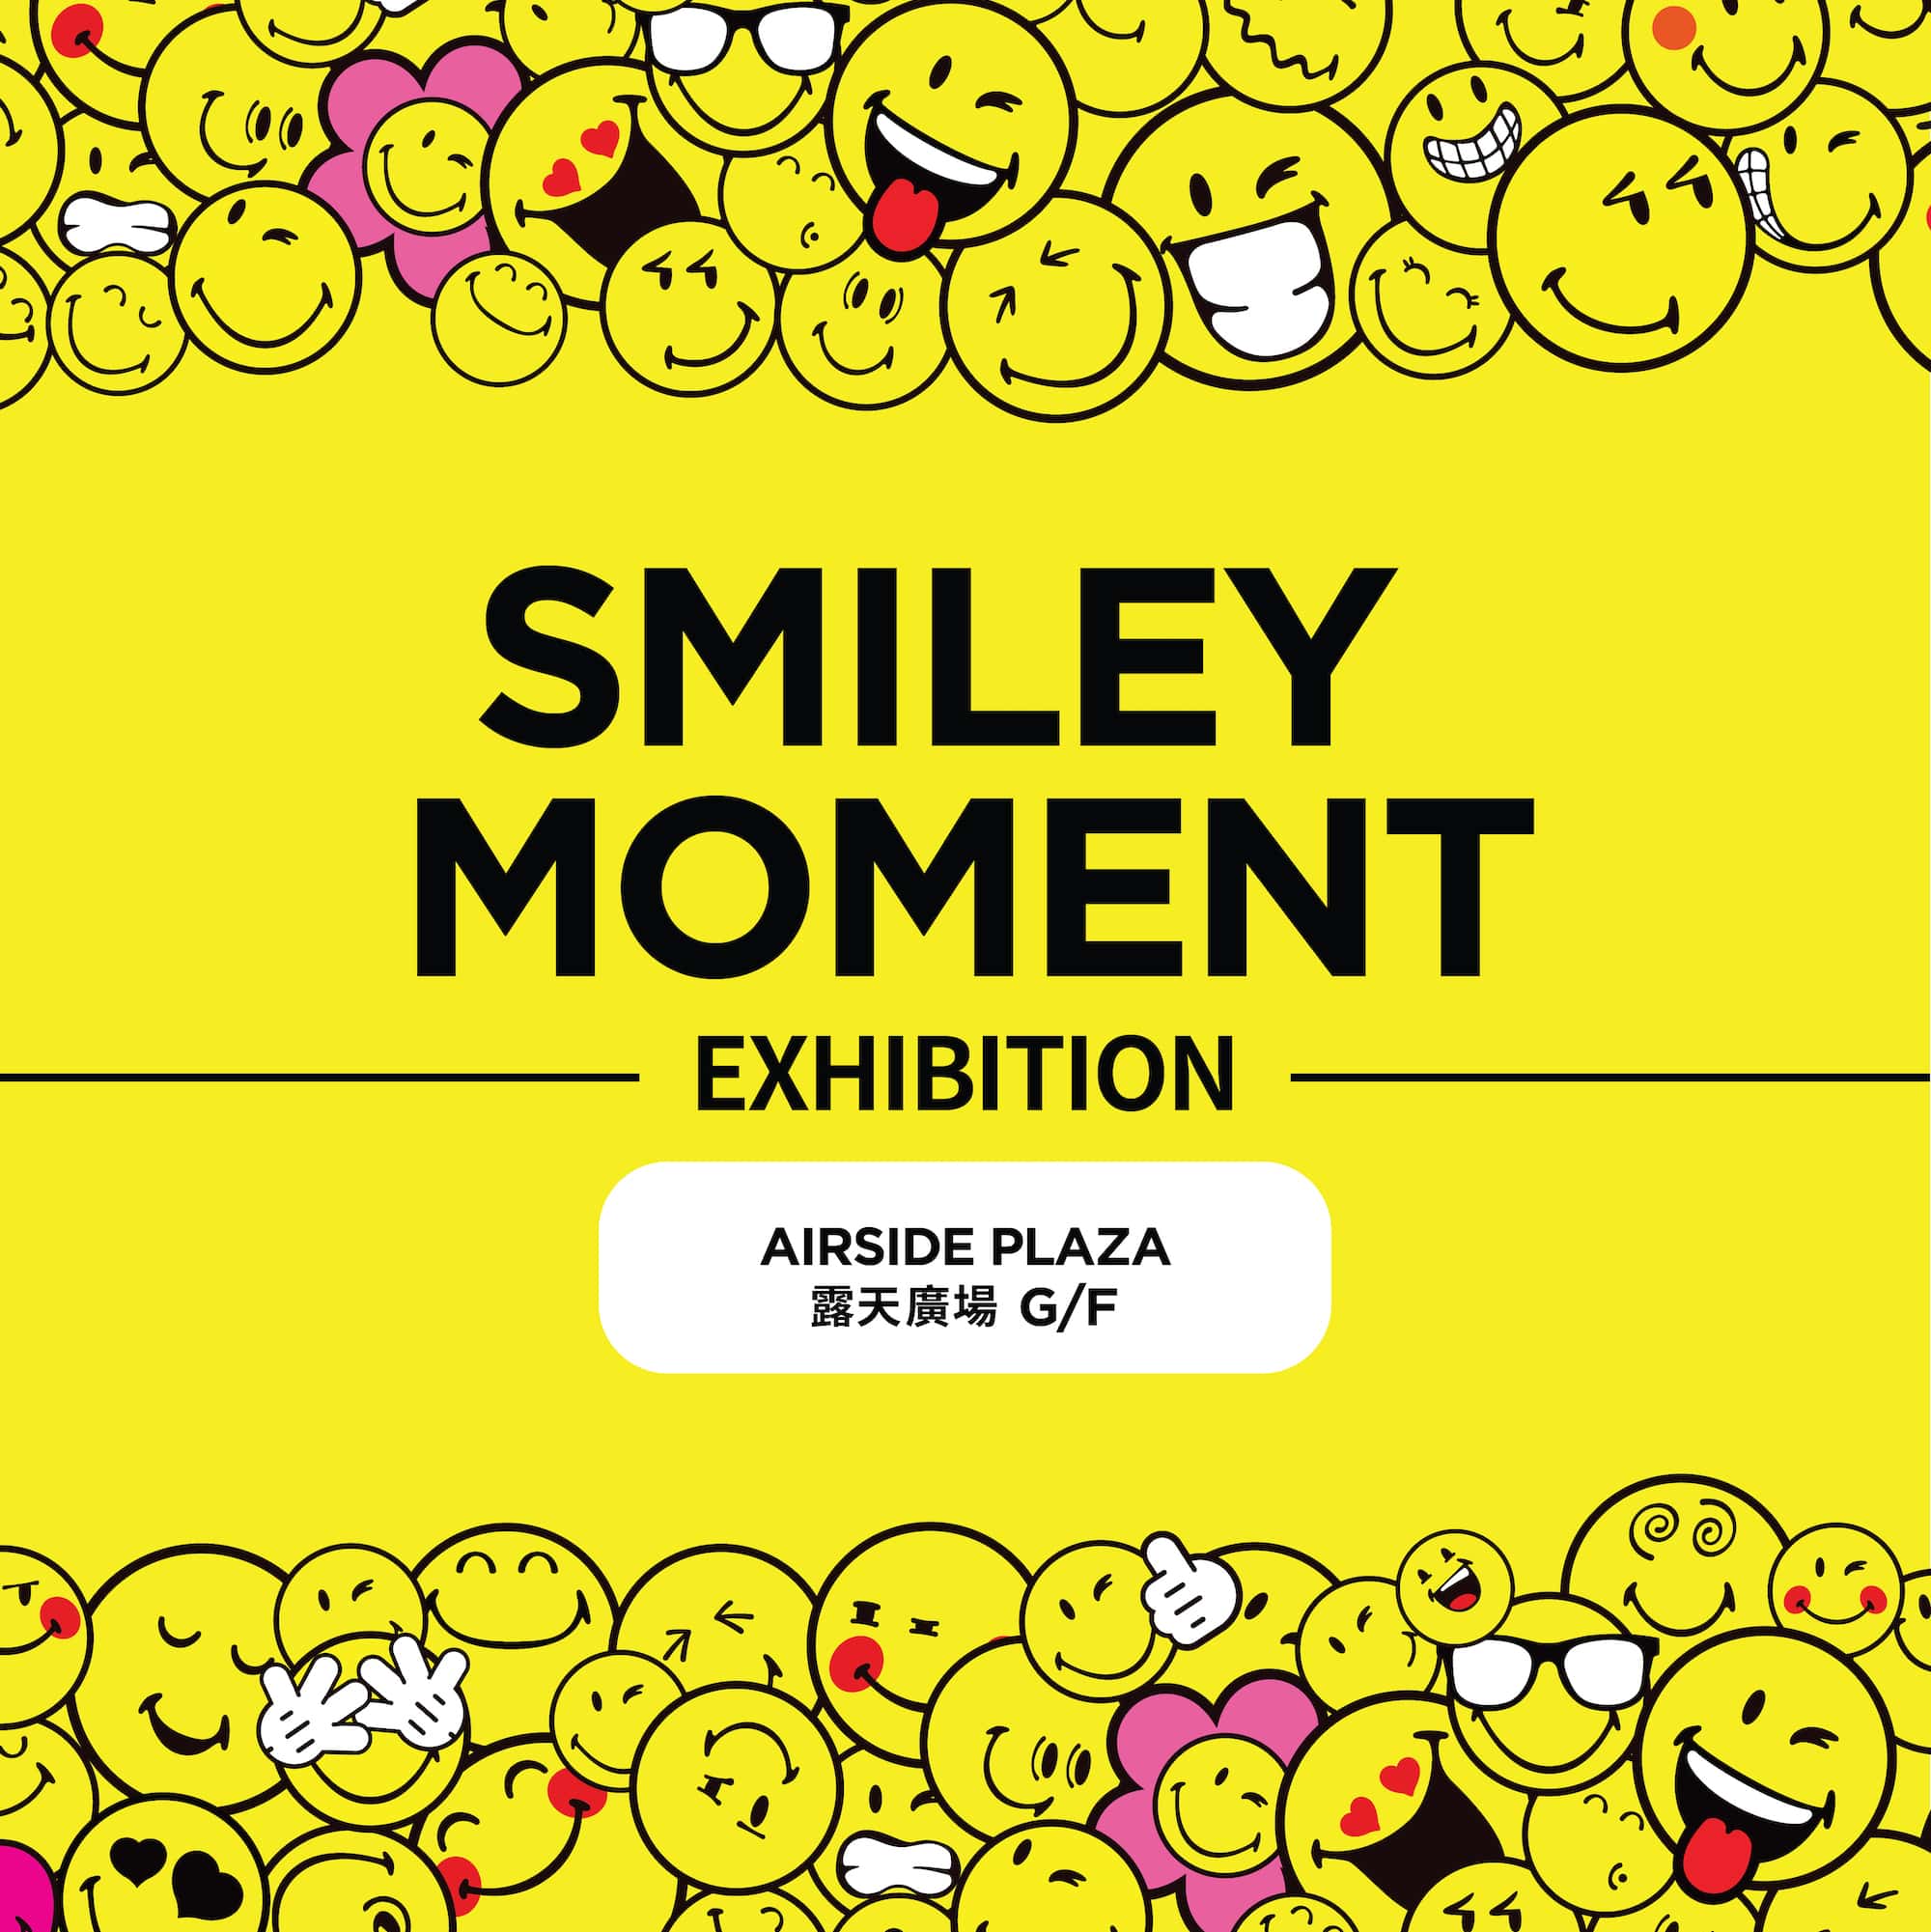 "SMILEY MOMENT" Exhibition